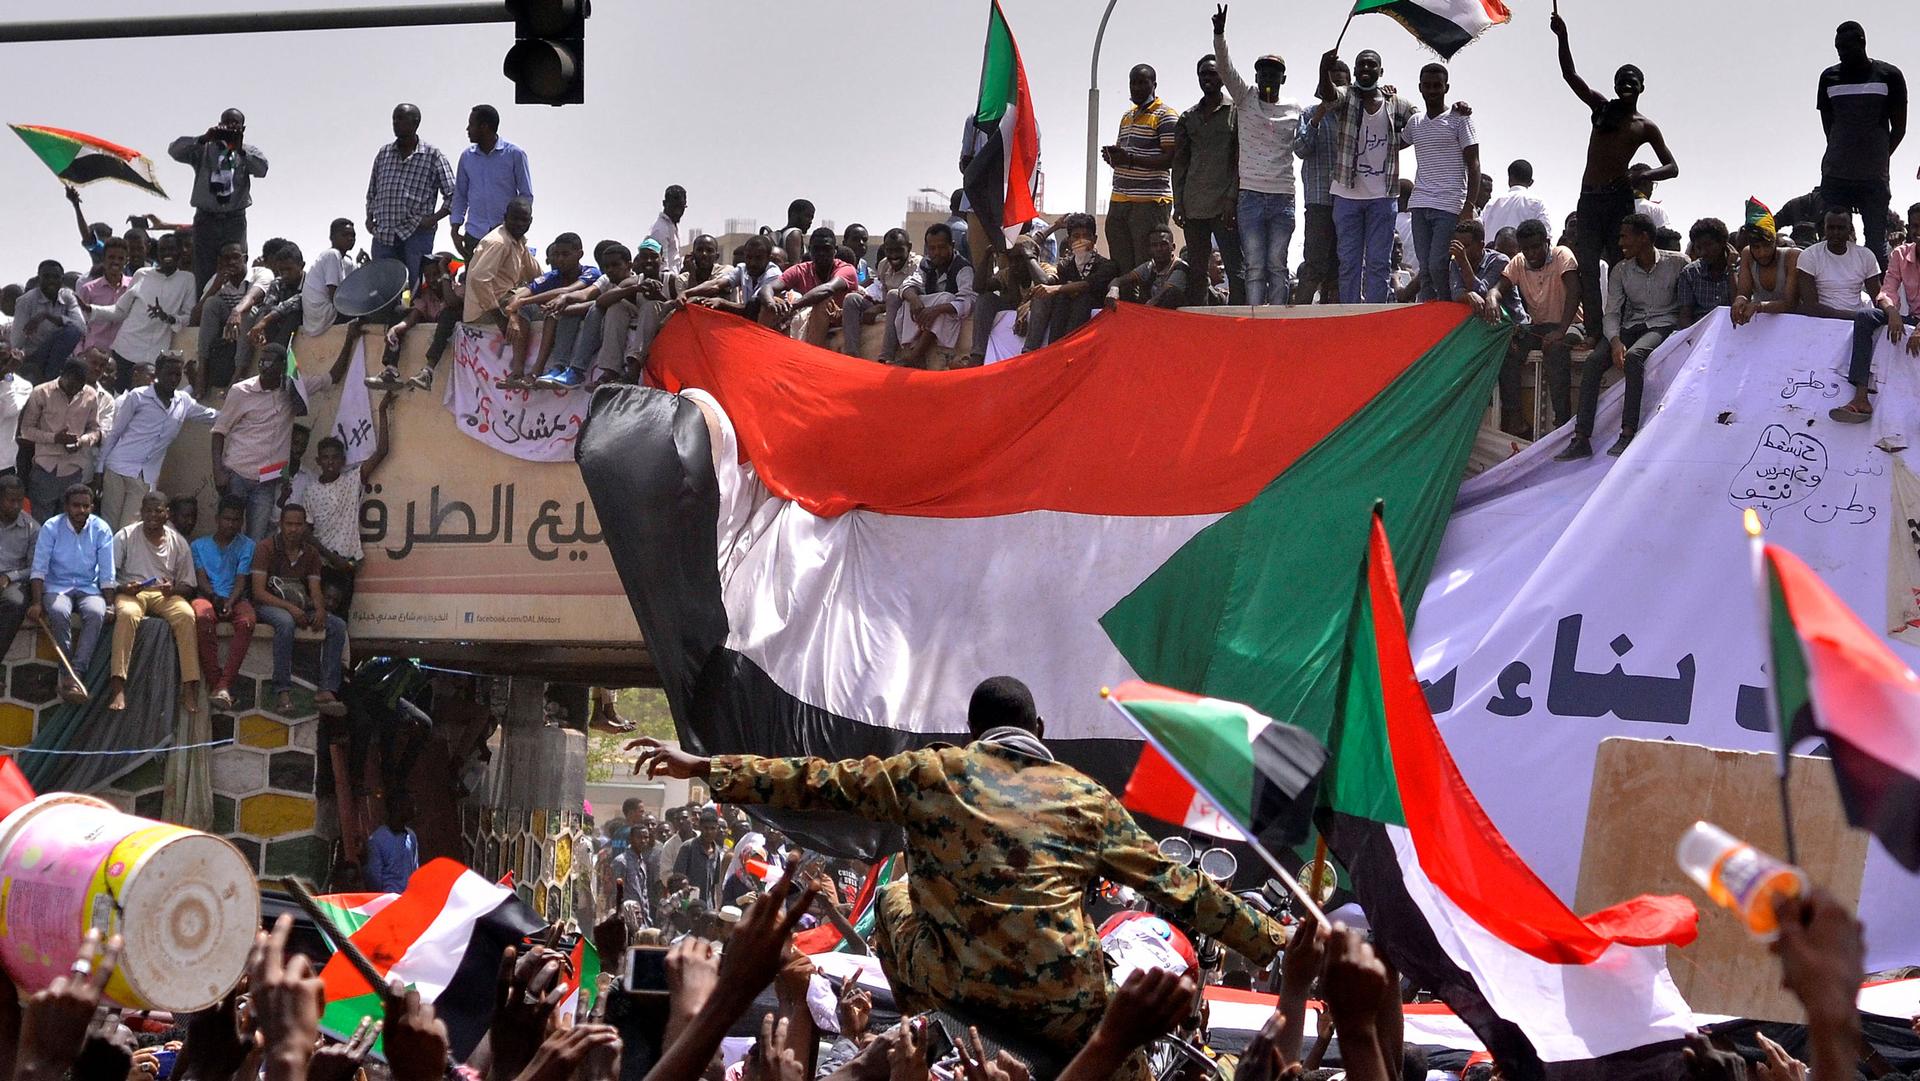 A thick crowd of people wave Sudanese flags and celebrate. A man in military fatigues is being carried through the crowd. 